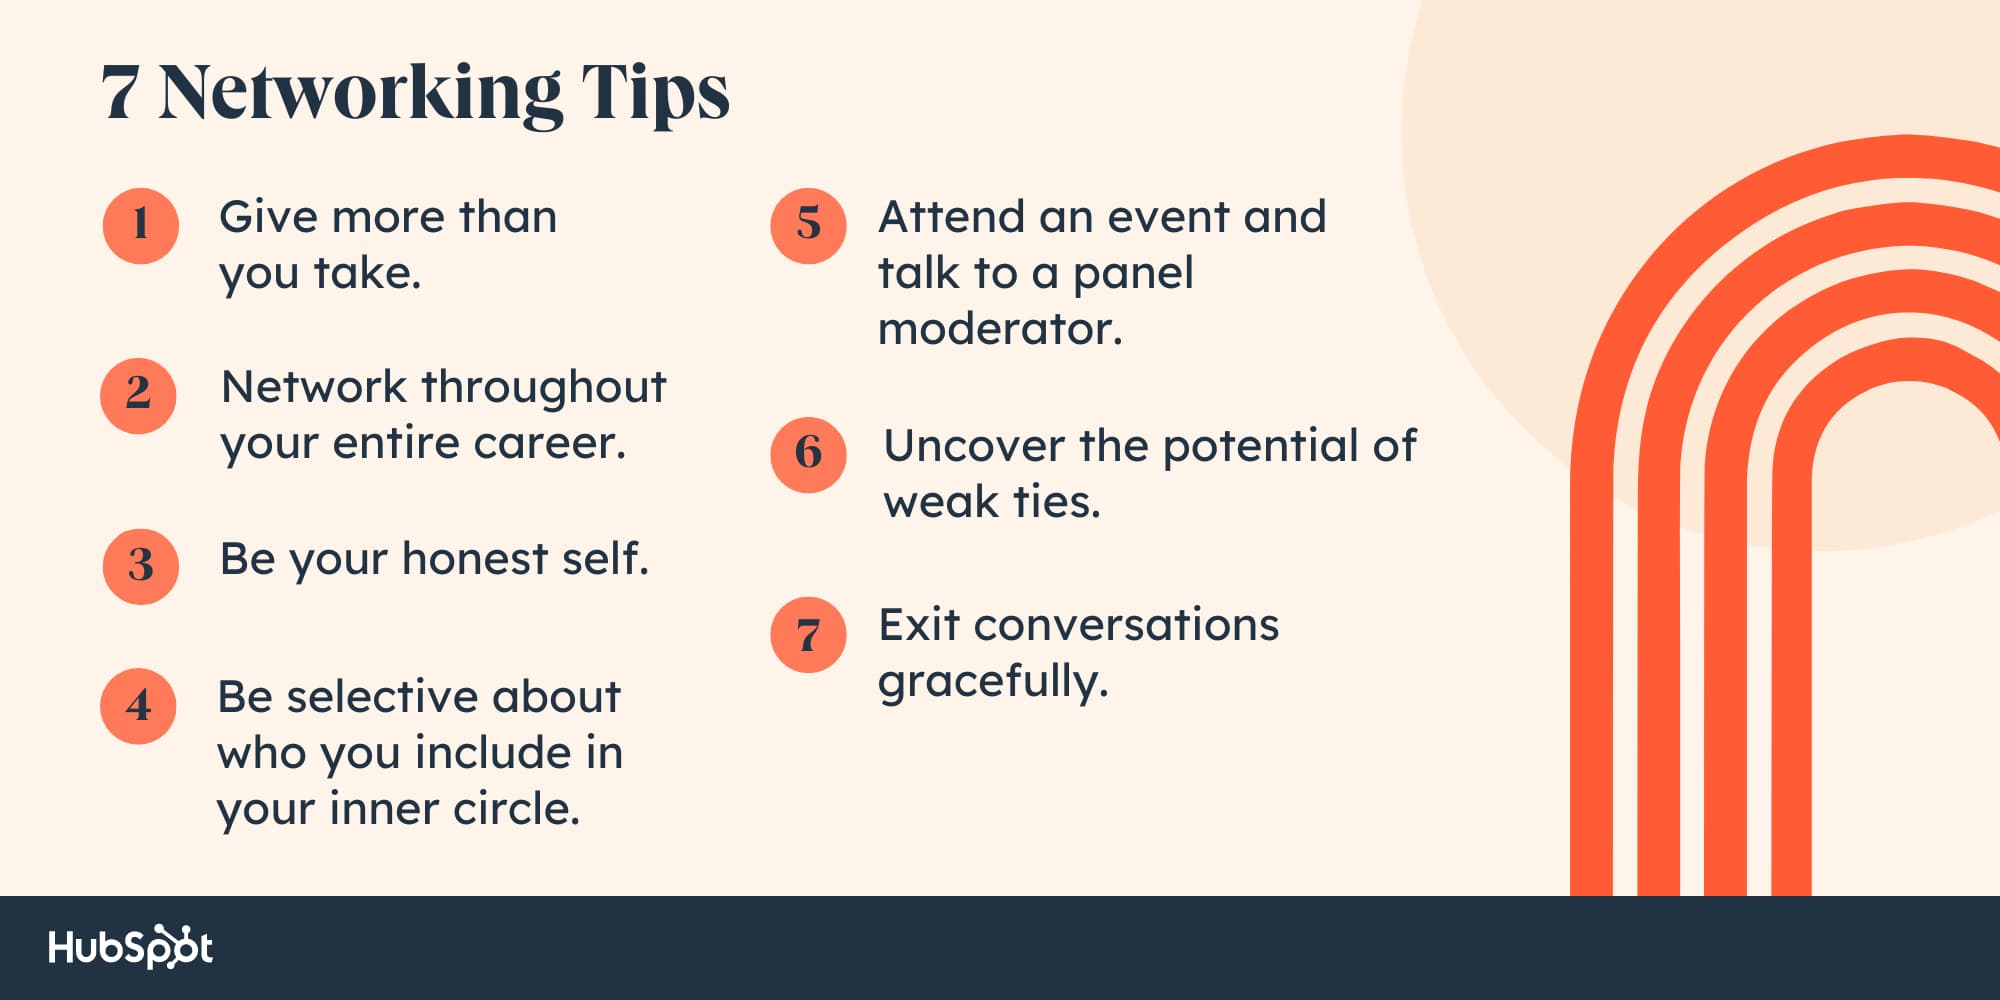 how to improve networking skills. Give more than you take. Network throughout your entire career. Be your honest self. Be selective about who you include in your inner circle. Attend an event and talk to a panel moderator. Uncover the potential of weak ties. Exit conversations gracefully.